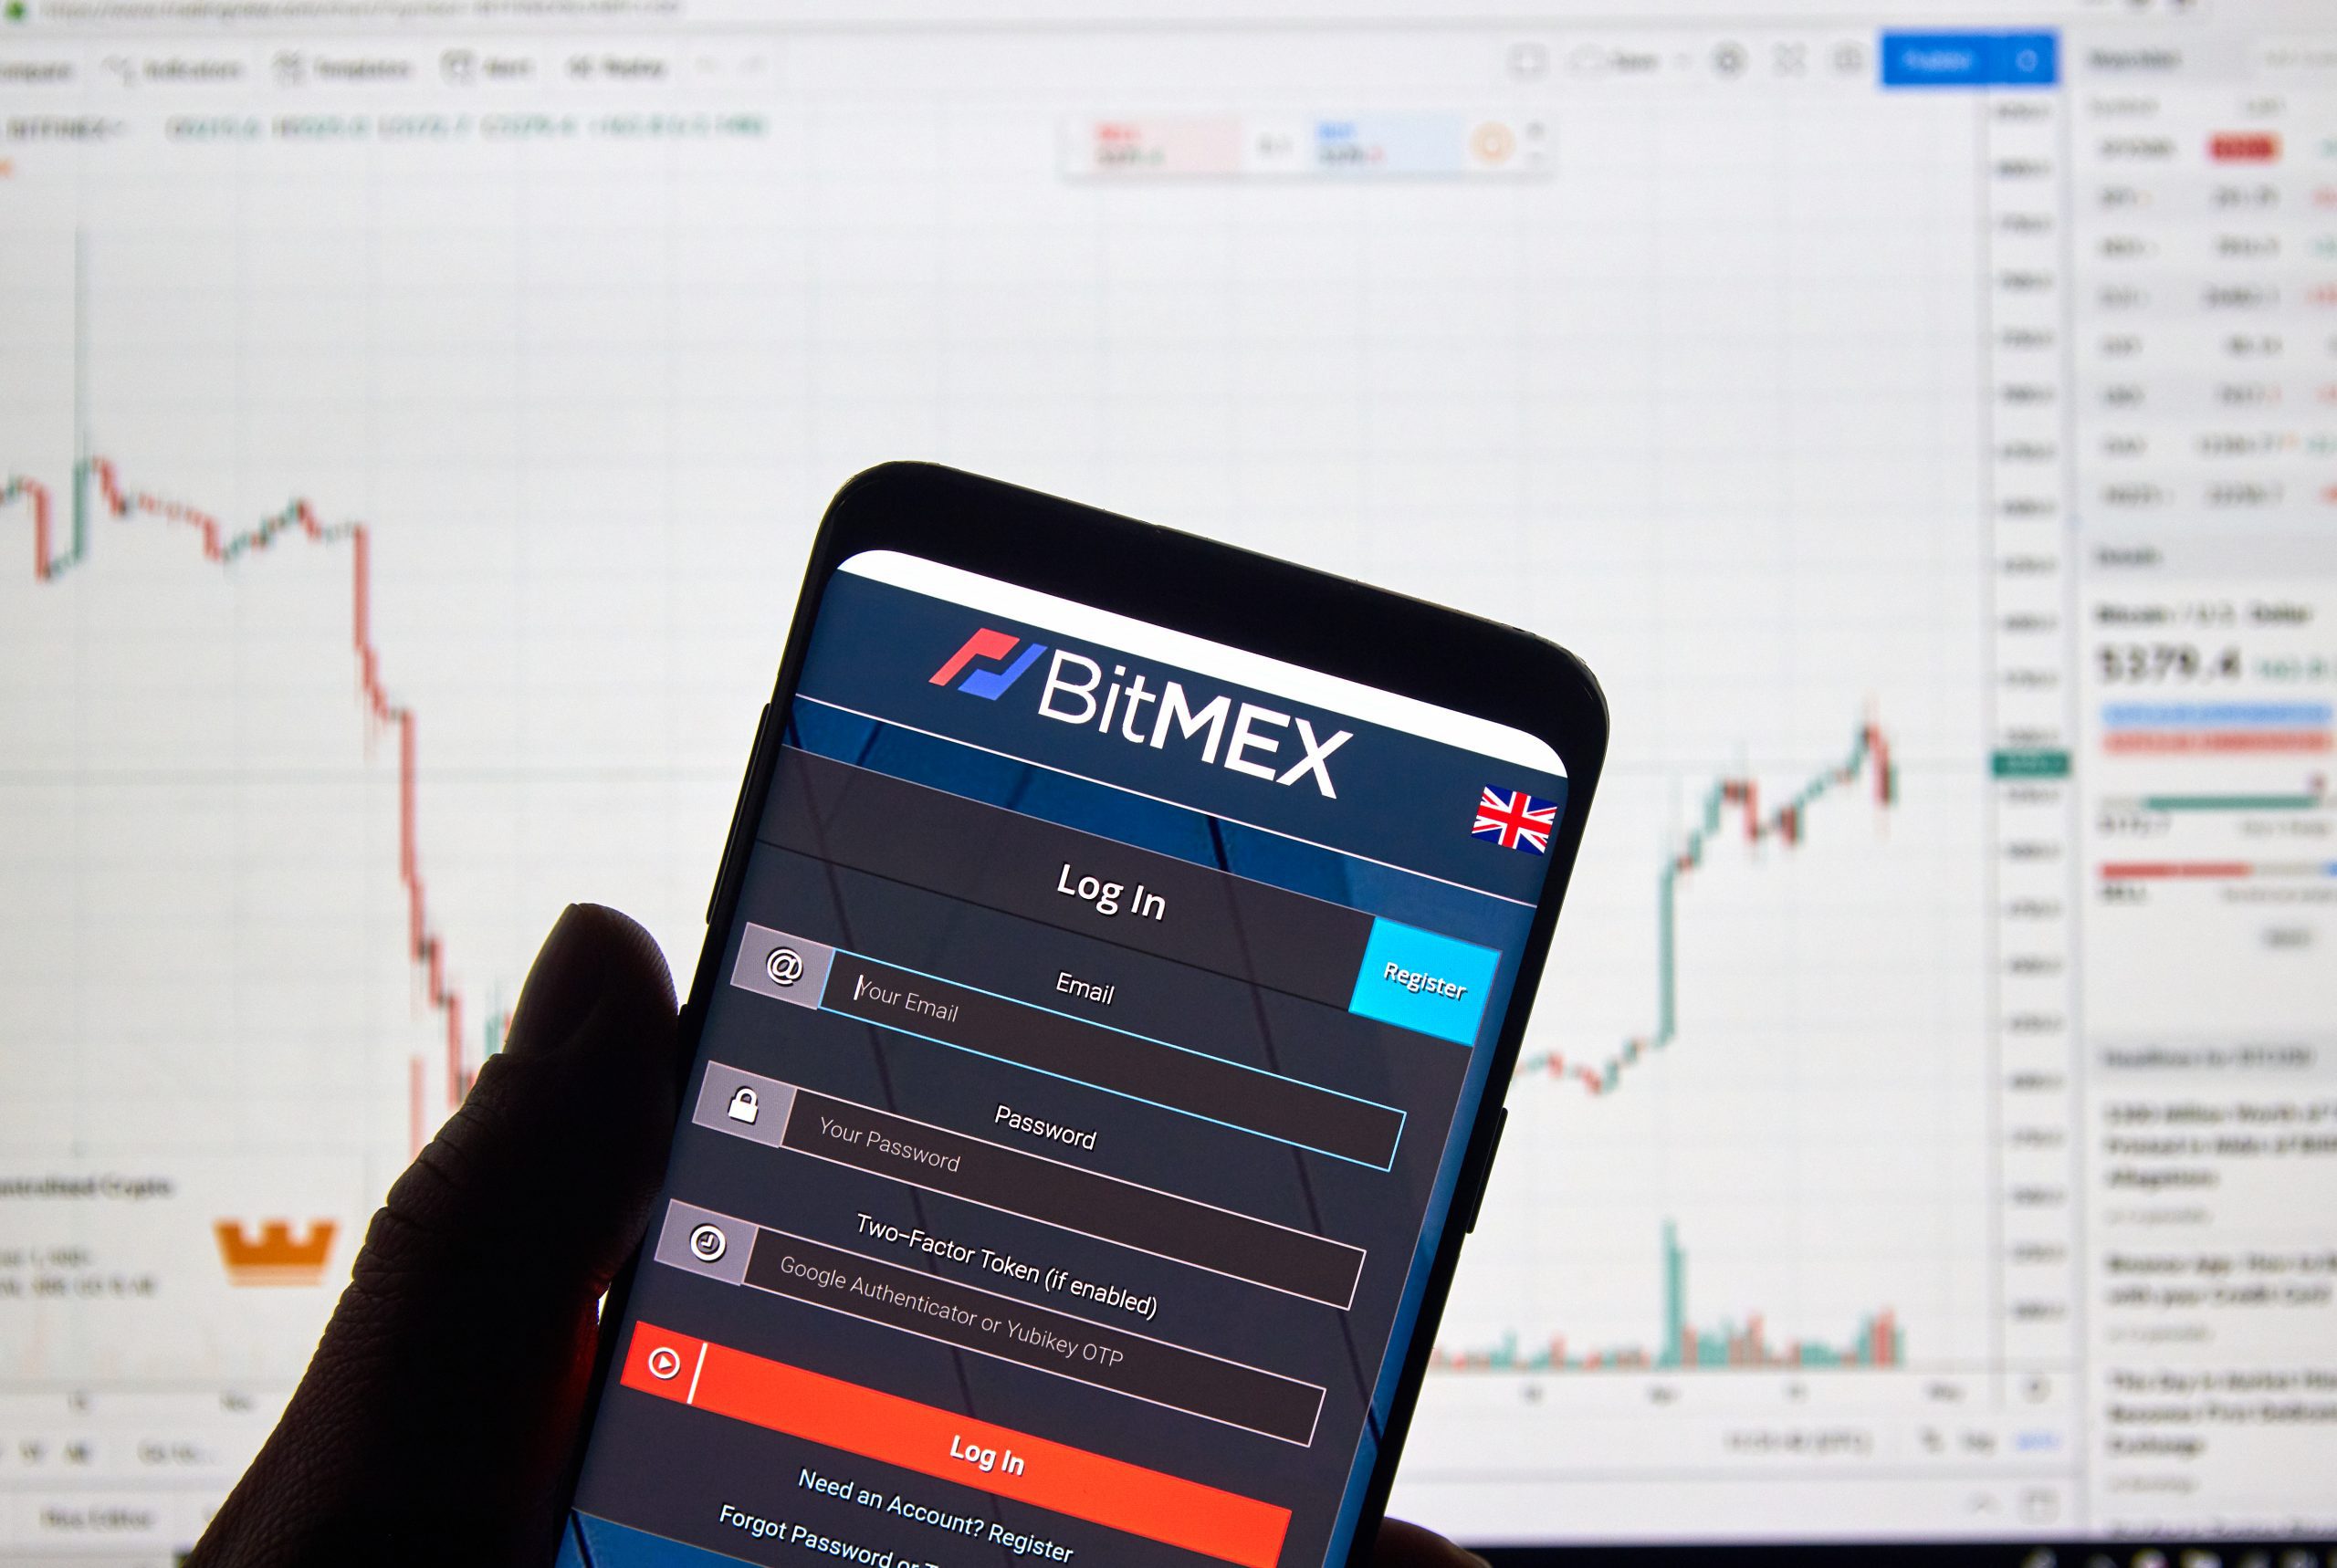 BitMEX launches BMEX token and distributes 1.5 million units in airdrop